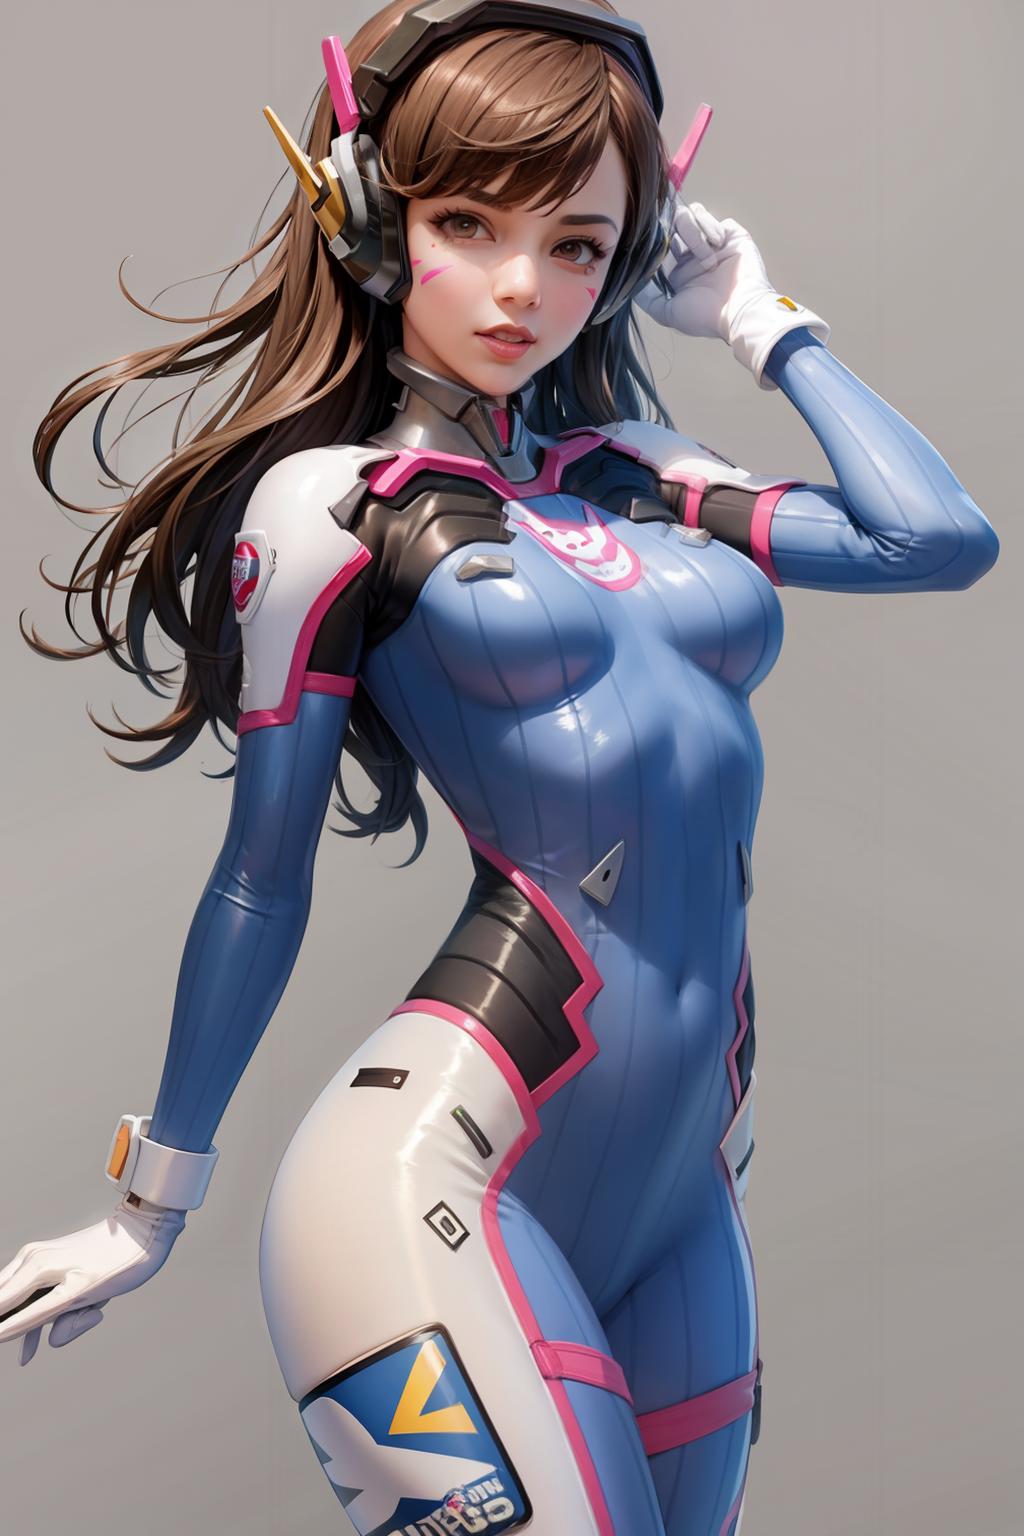 A 3D animated character in a blue and white jumpsuit.